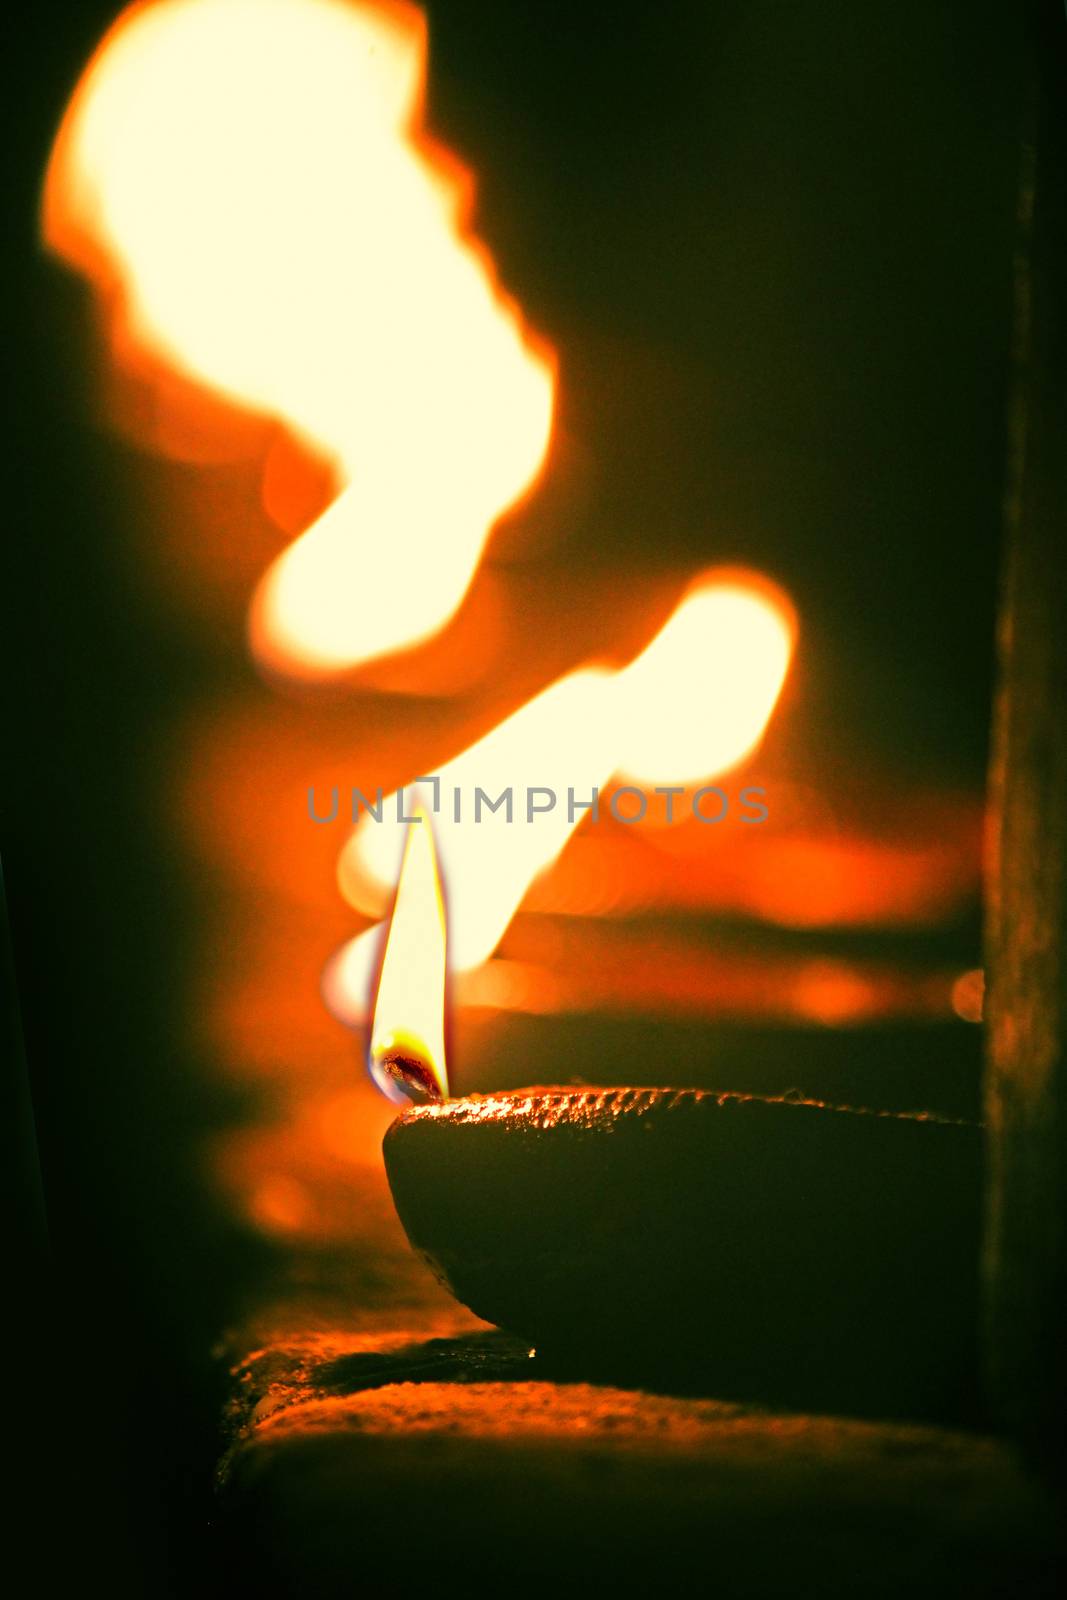 Indian Oil Lamp. An oil lamp is an object used to produce light continuously for a period of time using an oil-based fuel source. The use of oil lamps began thousands of years ago